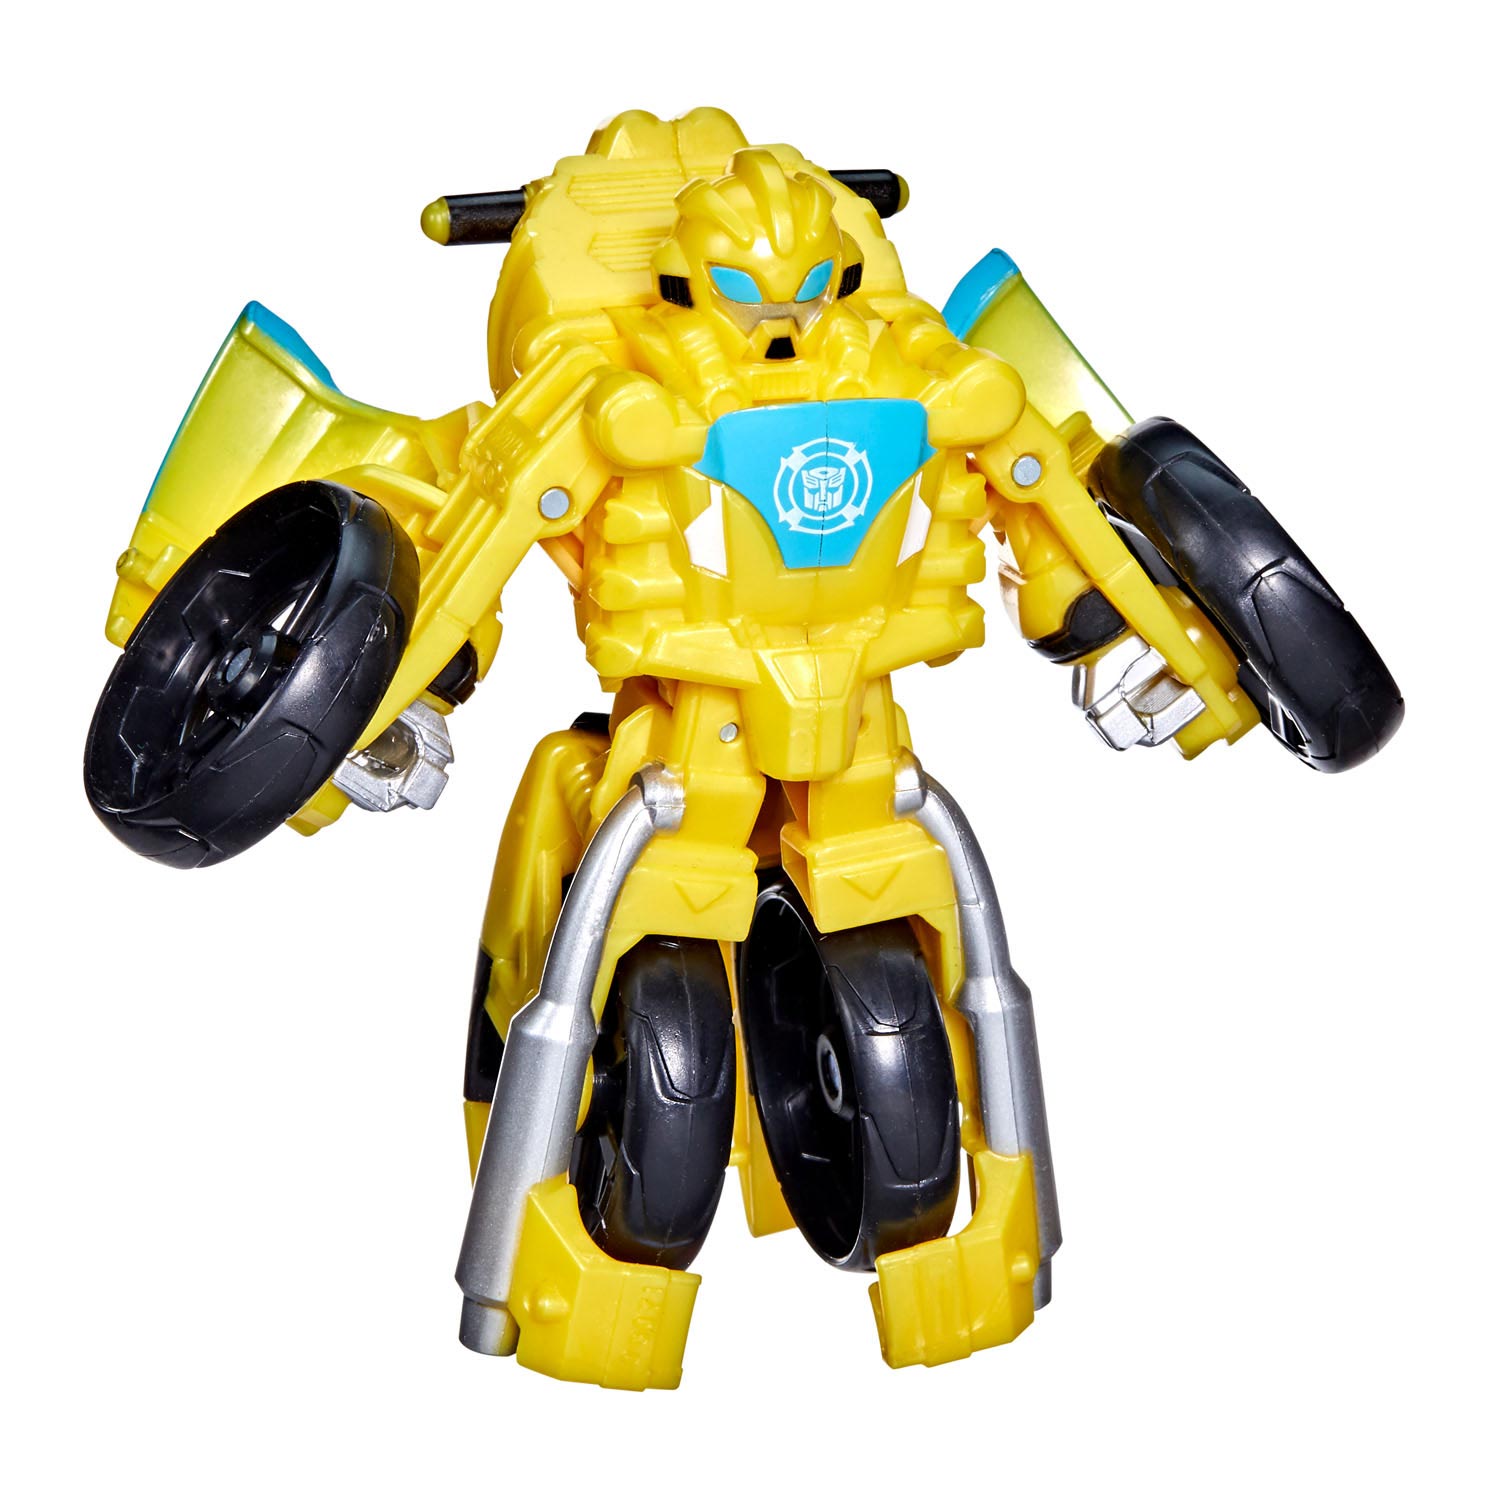 Transformers Rescue Bots Academy – Bumblebee